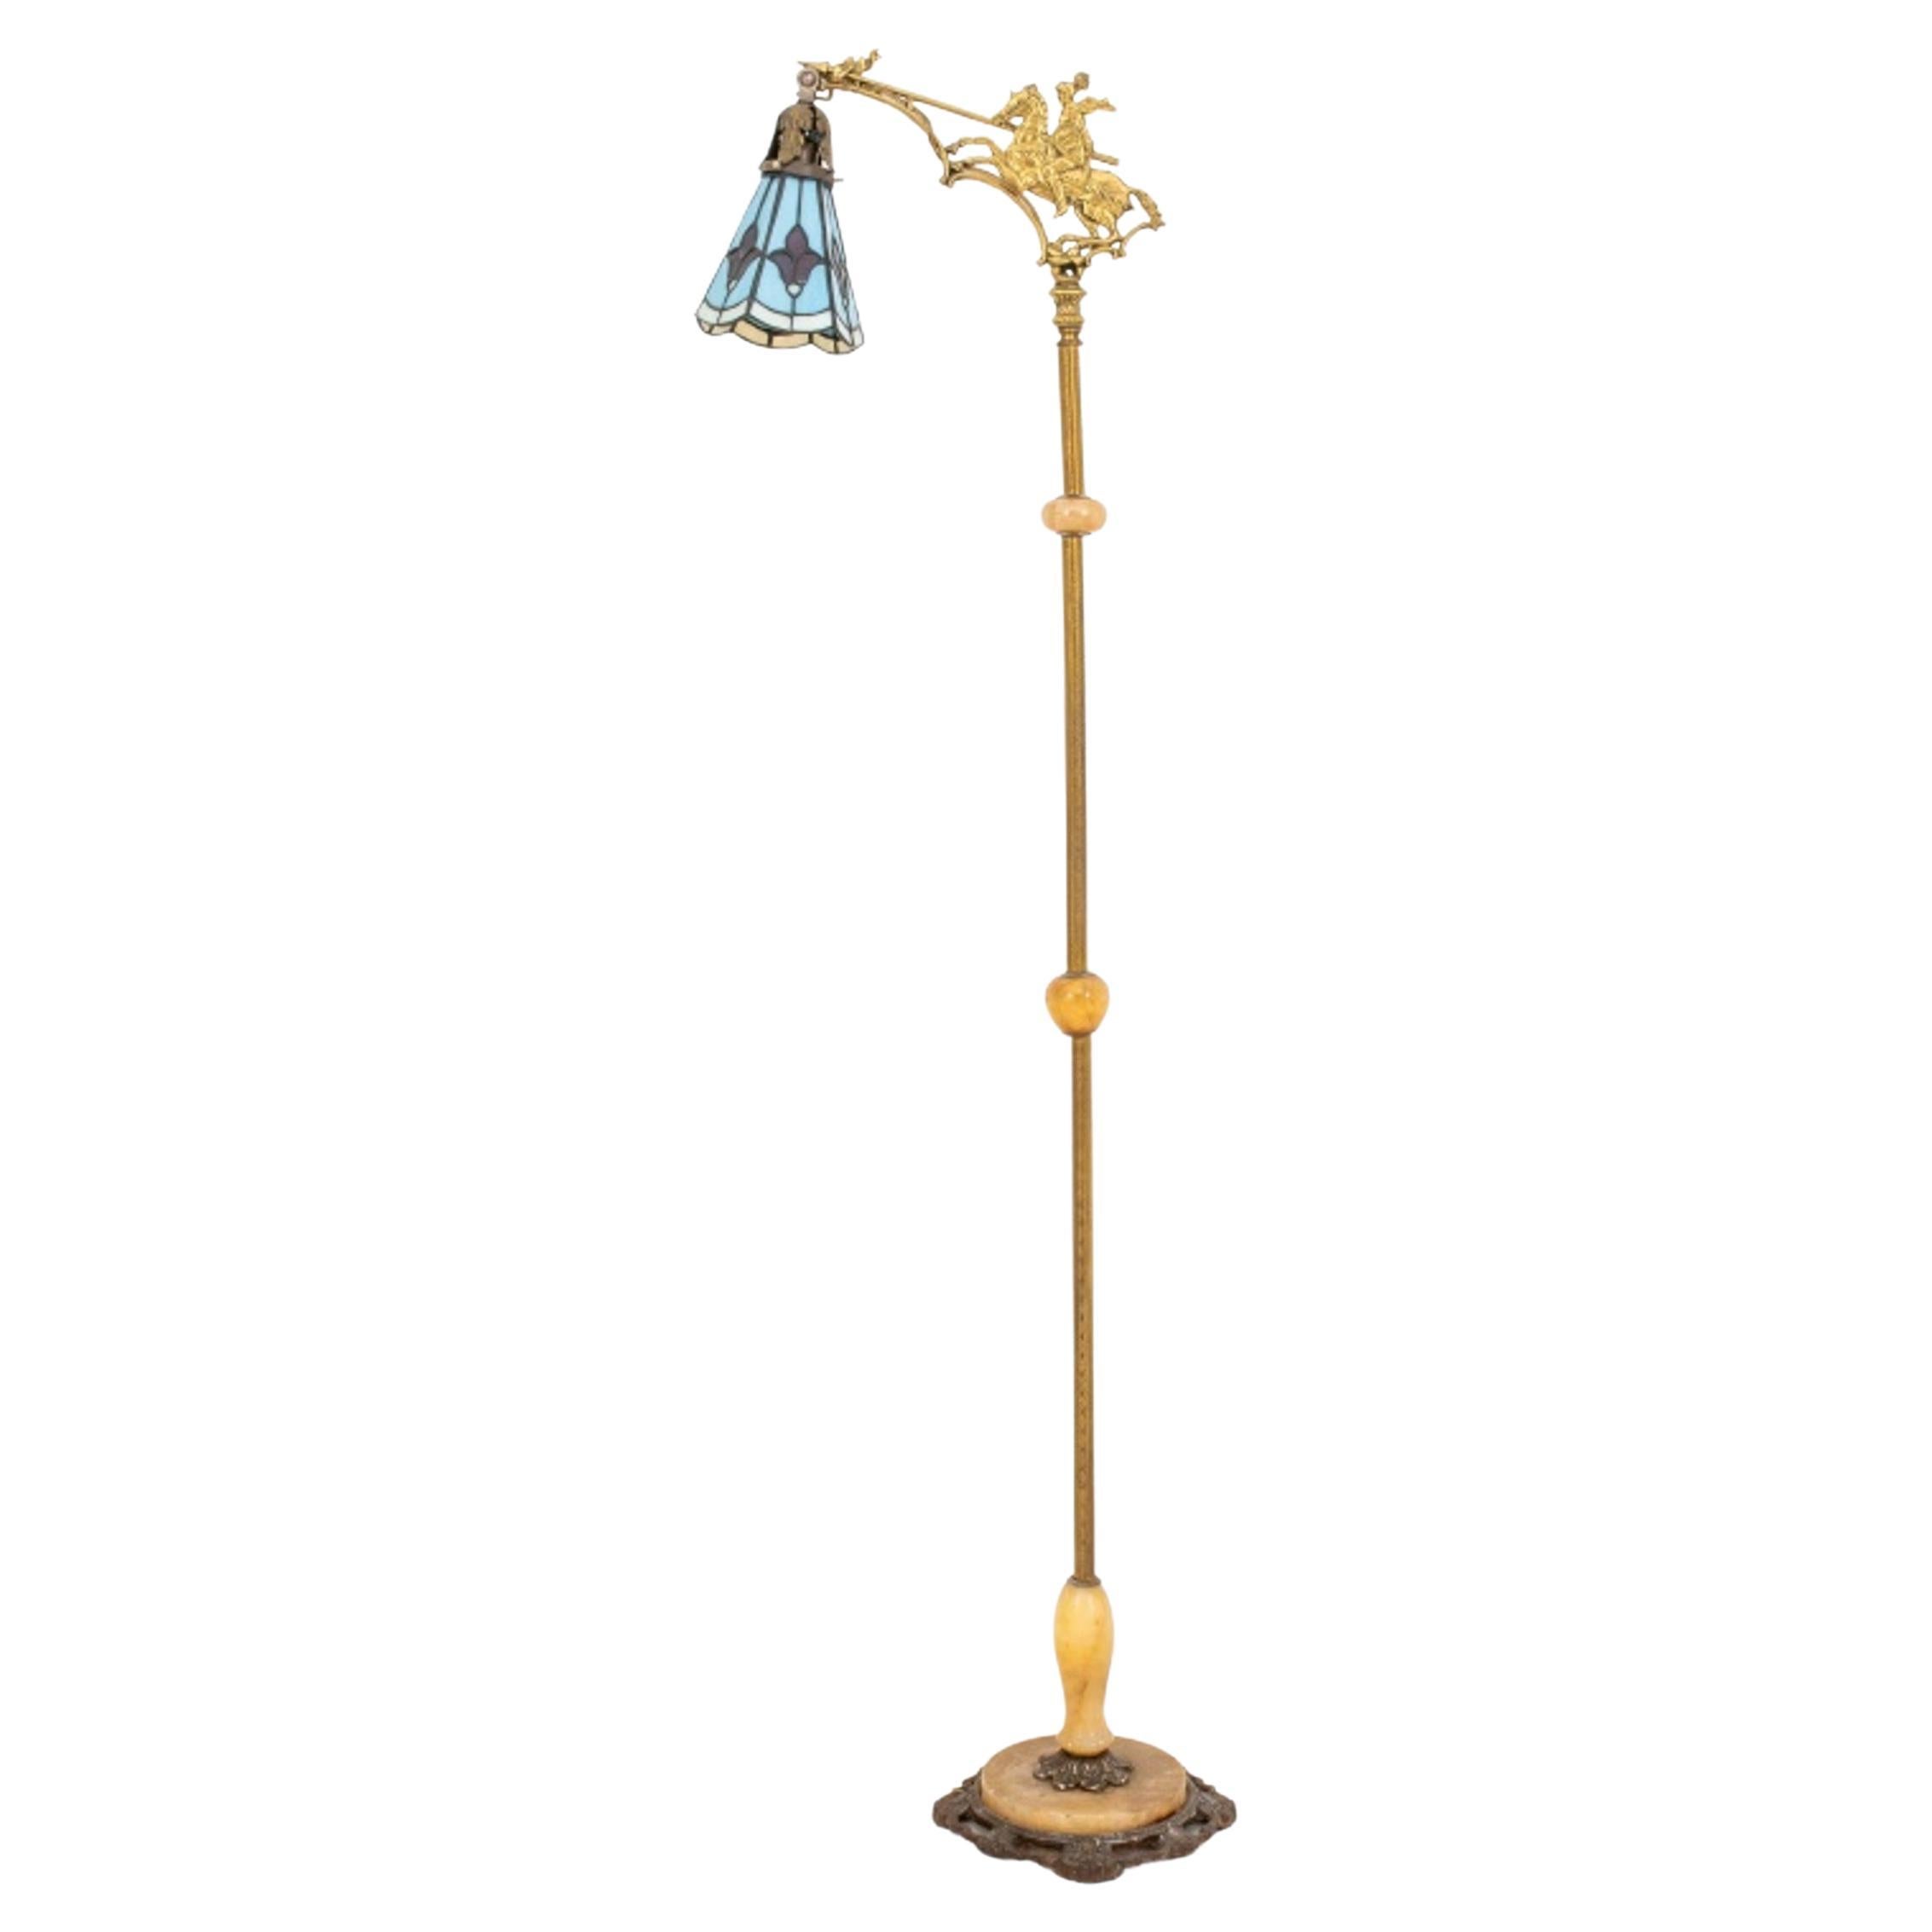 American Brass and Stained Glass Floor Lamp, 1920s